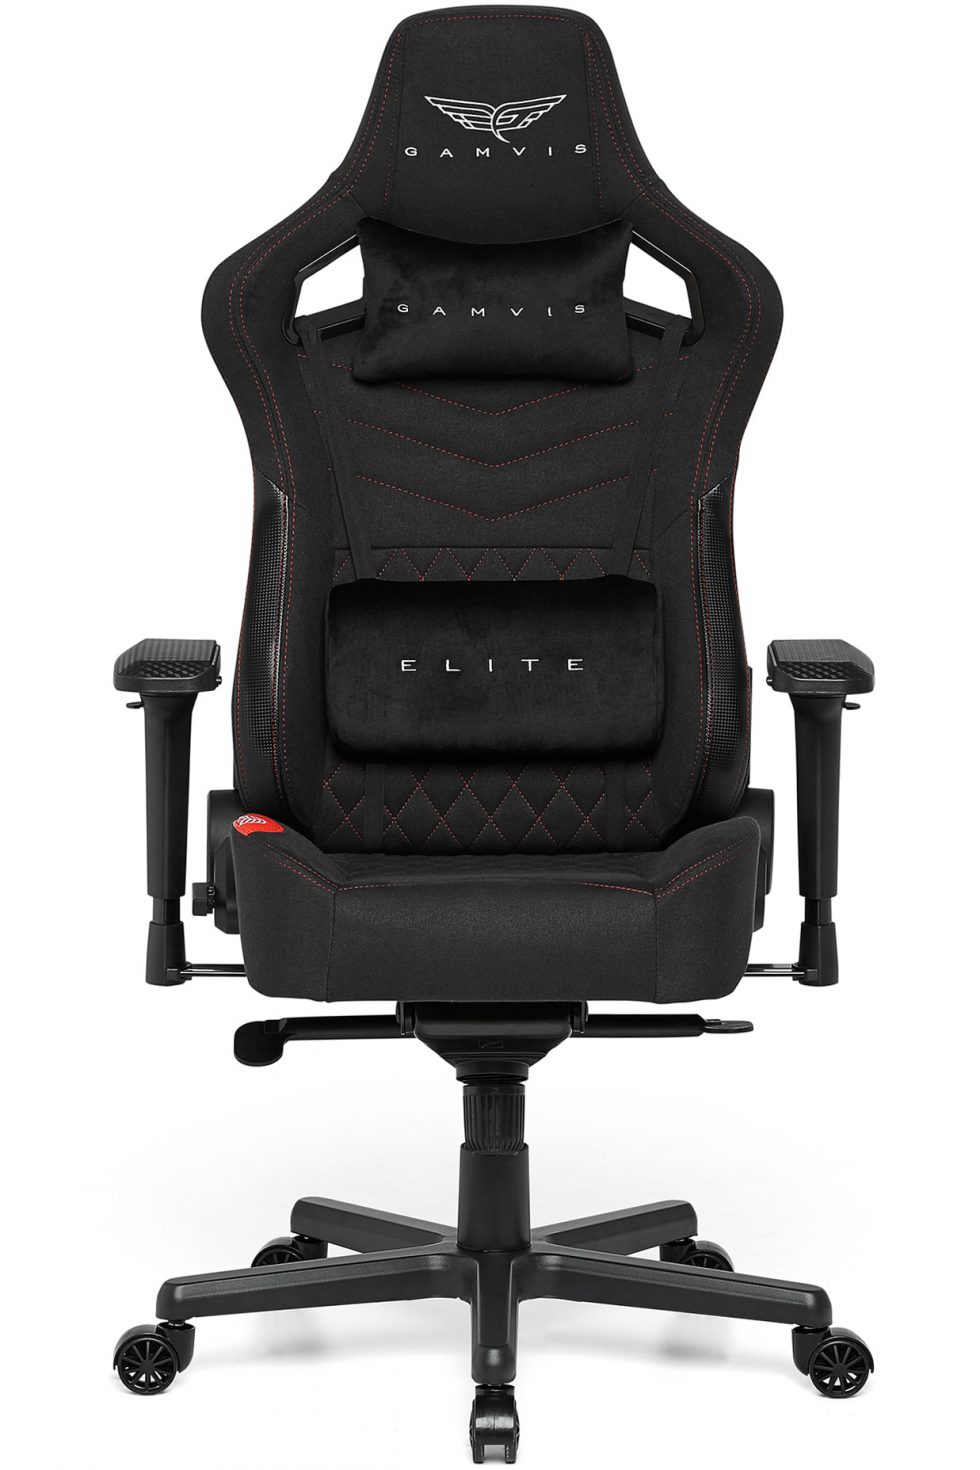 Gamvis Elite fabric gaming chair black red